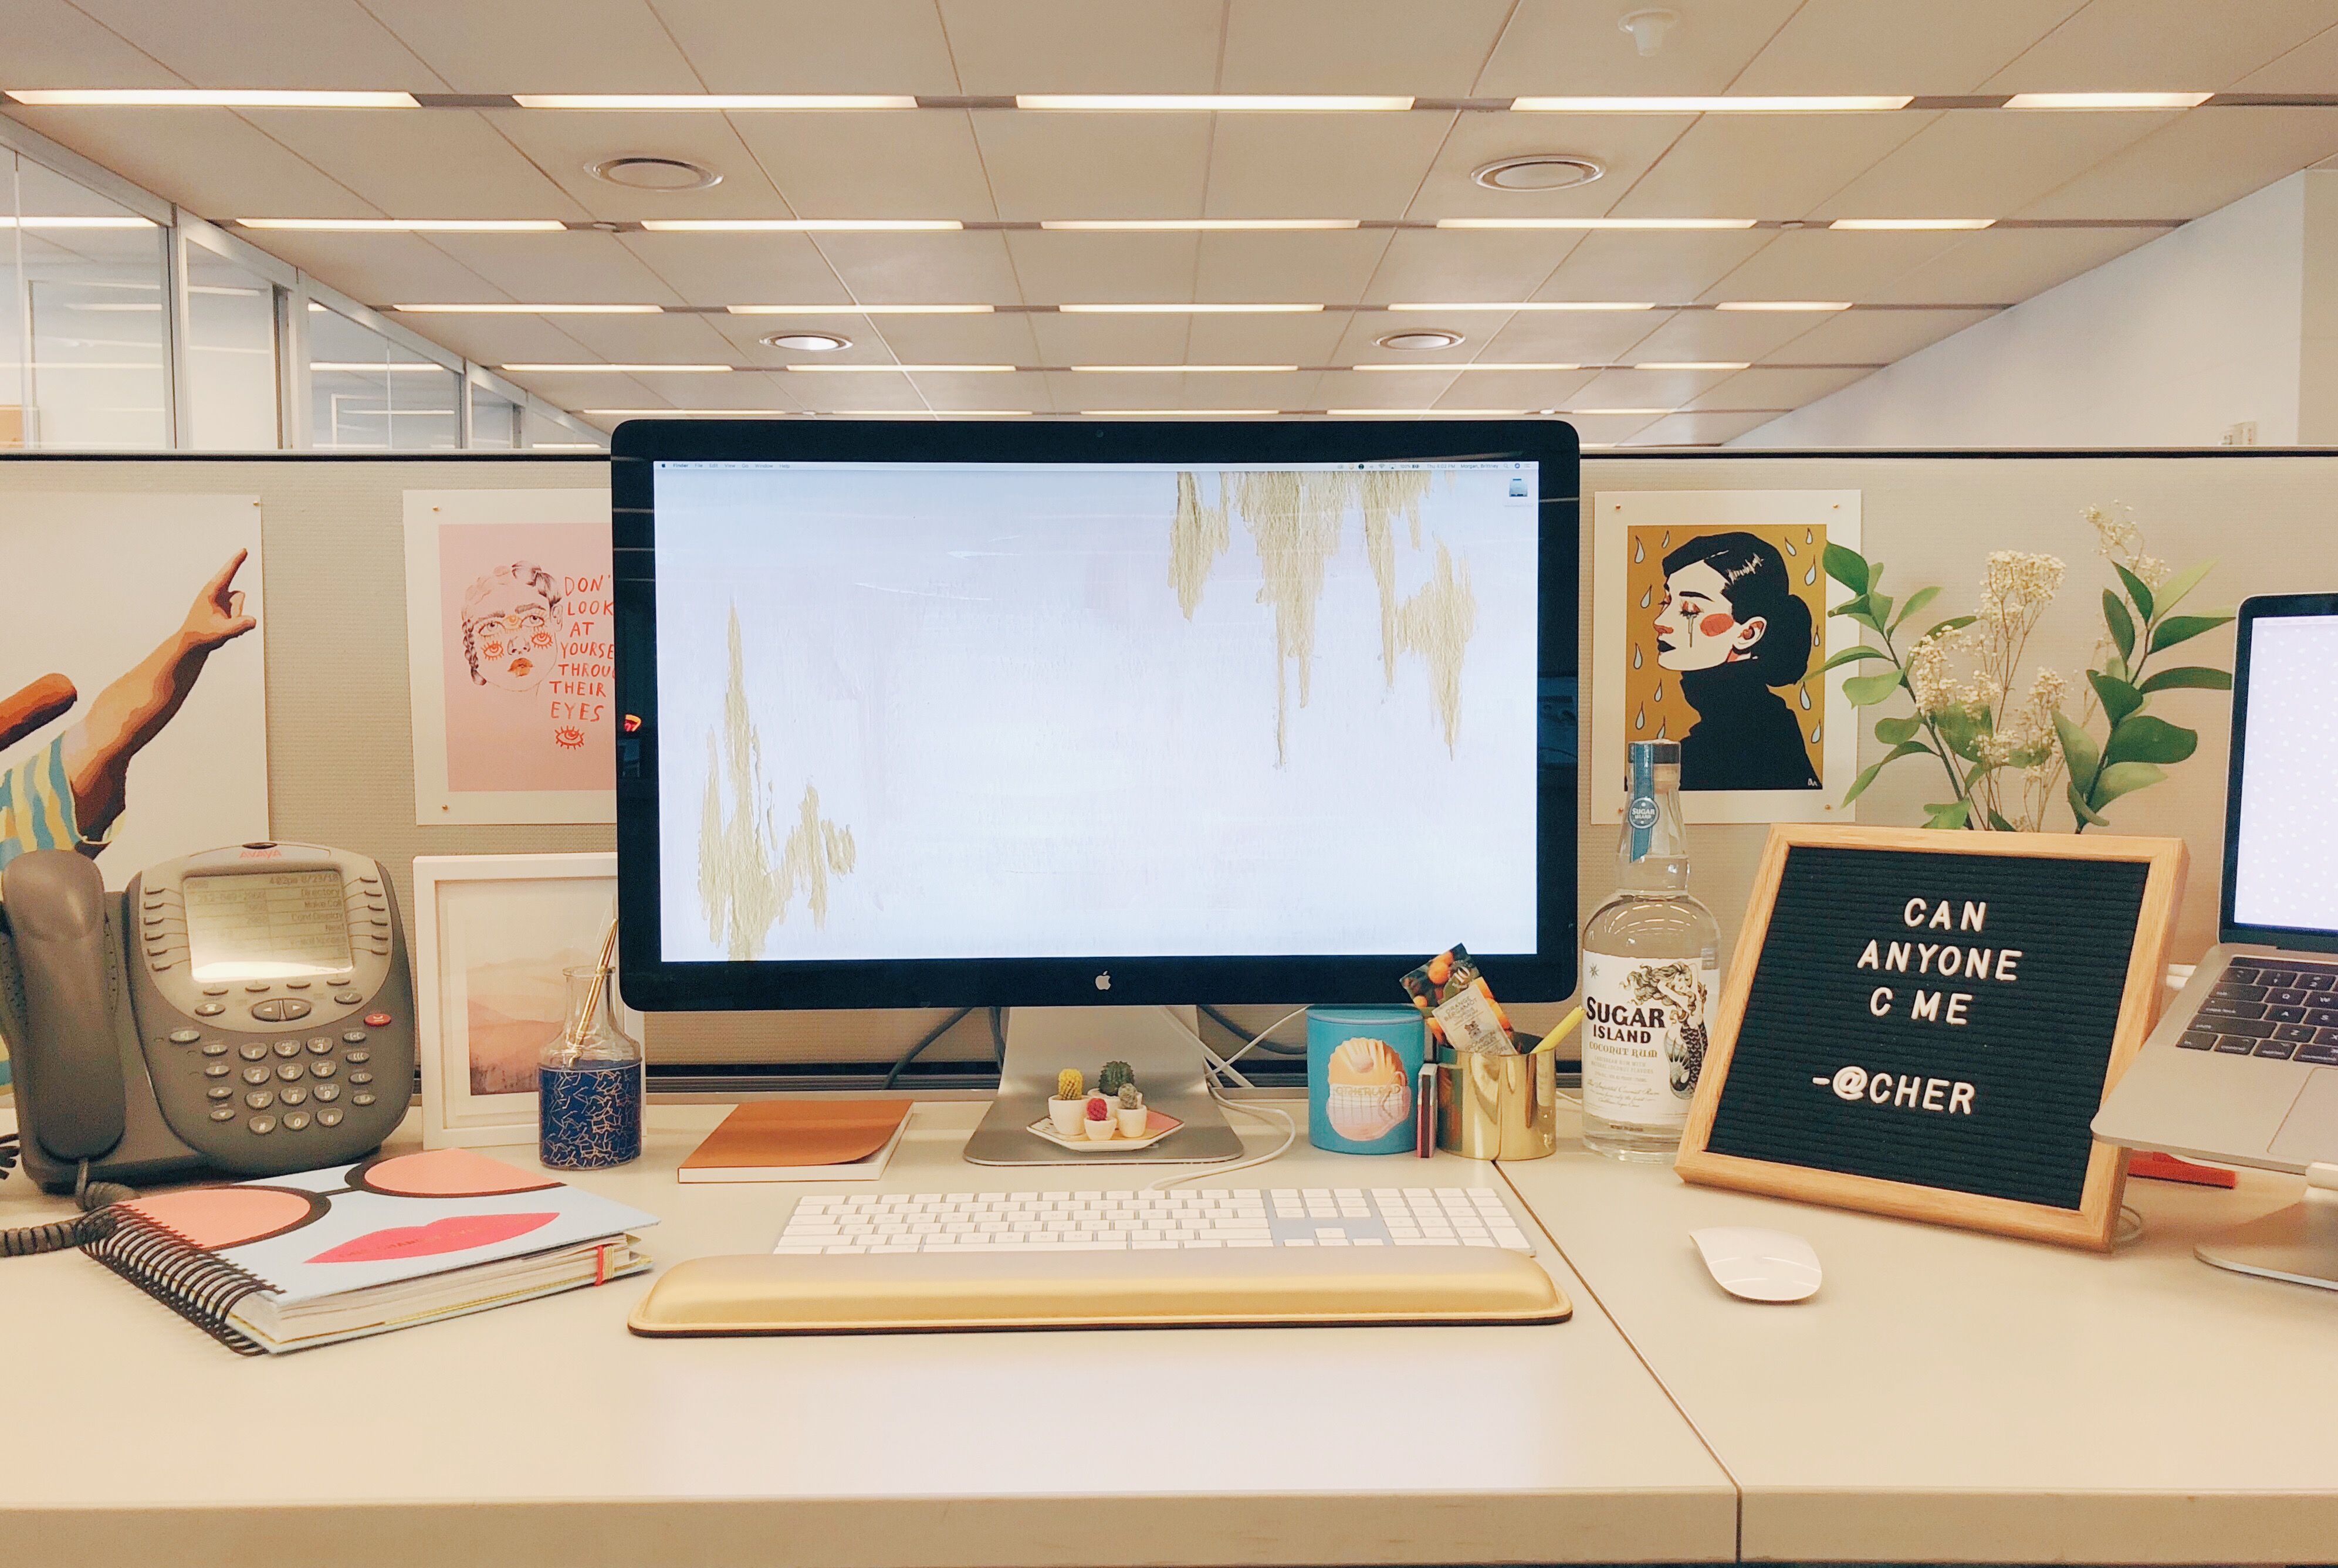 10 Best Cubicle Decor Ideas In 2018, How To Decorate My Office Desk